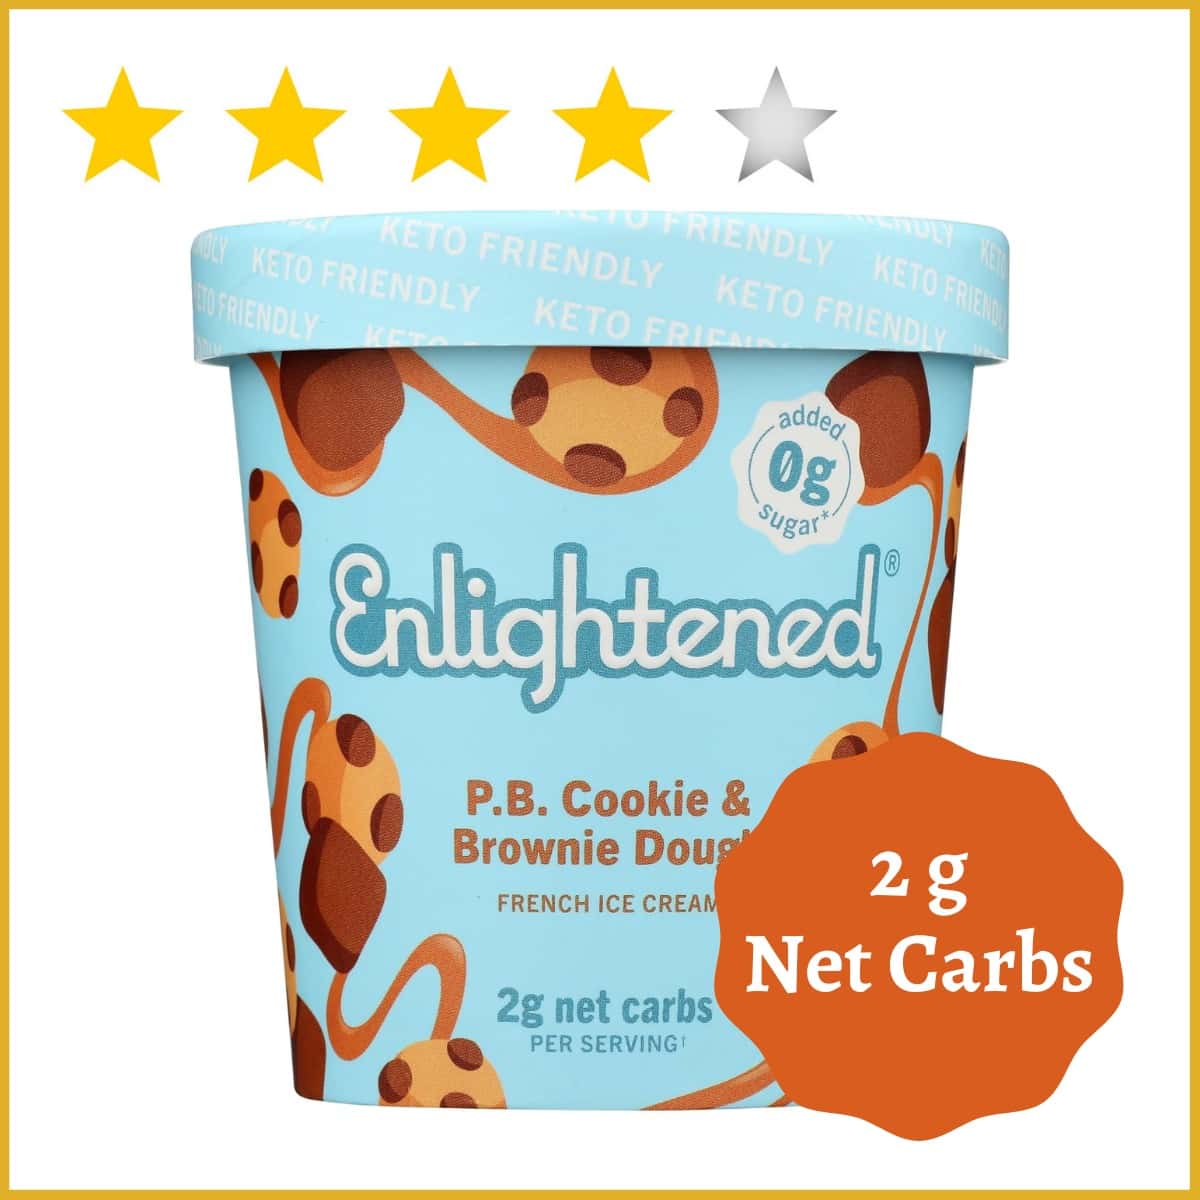 Enlightened Cookie and Brownie Dough Ice Cream